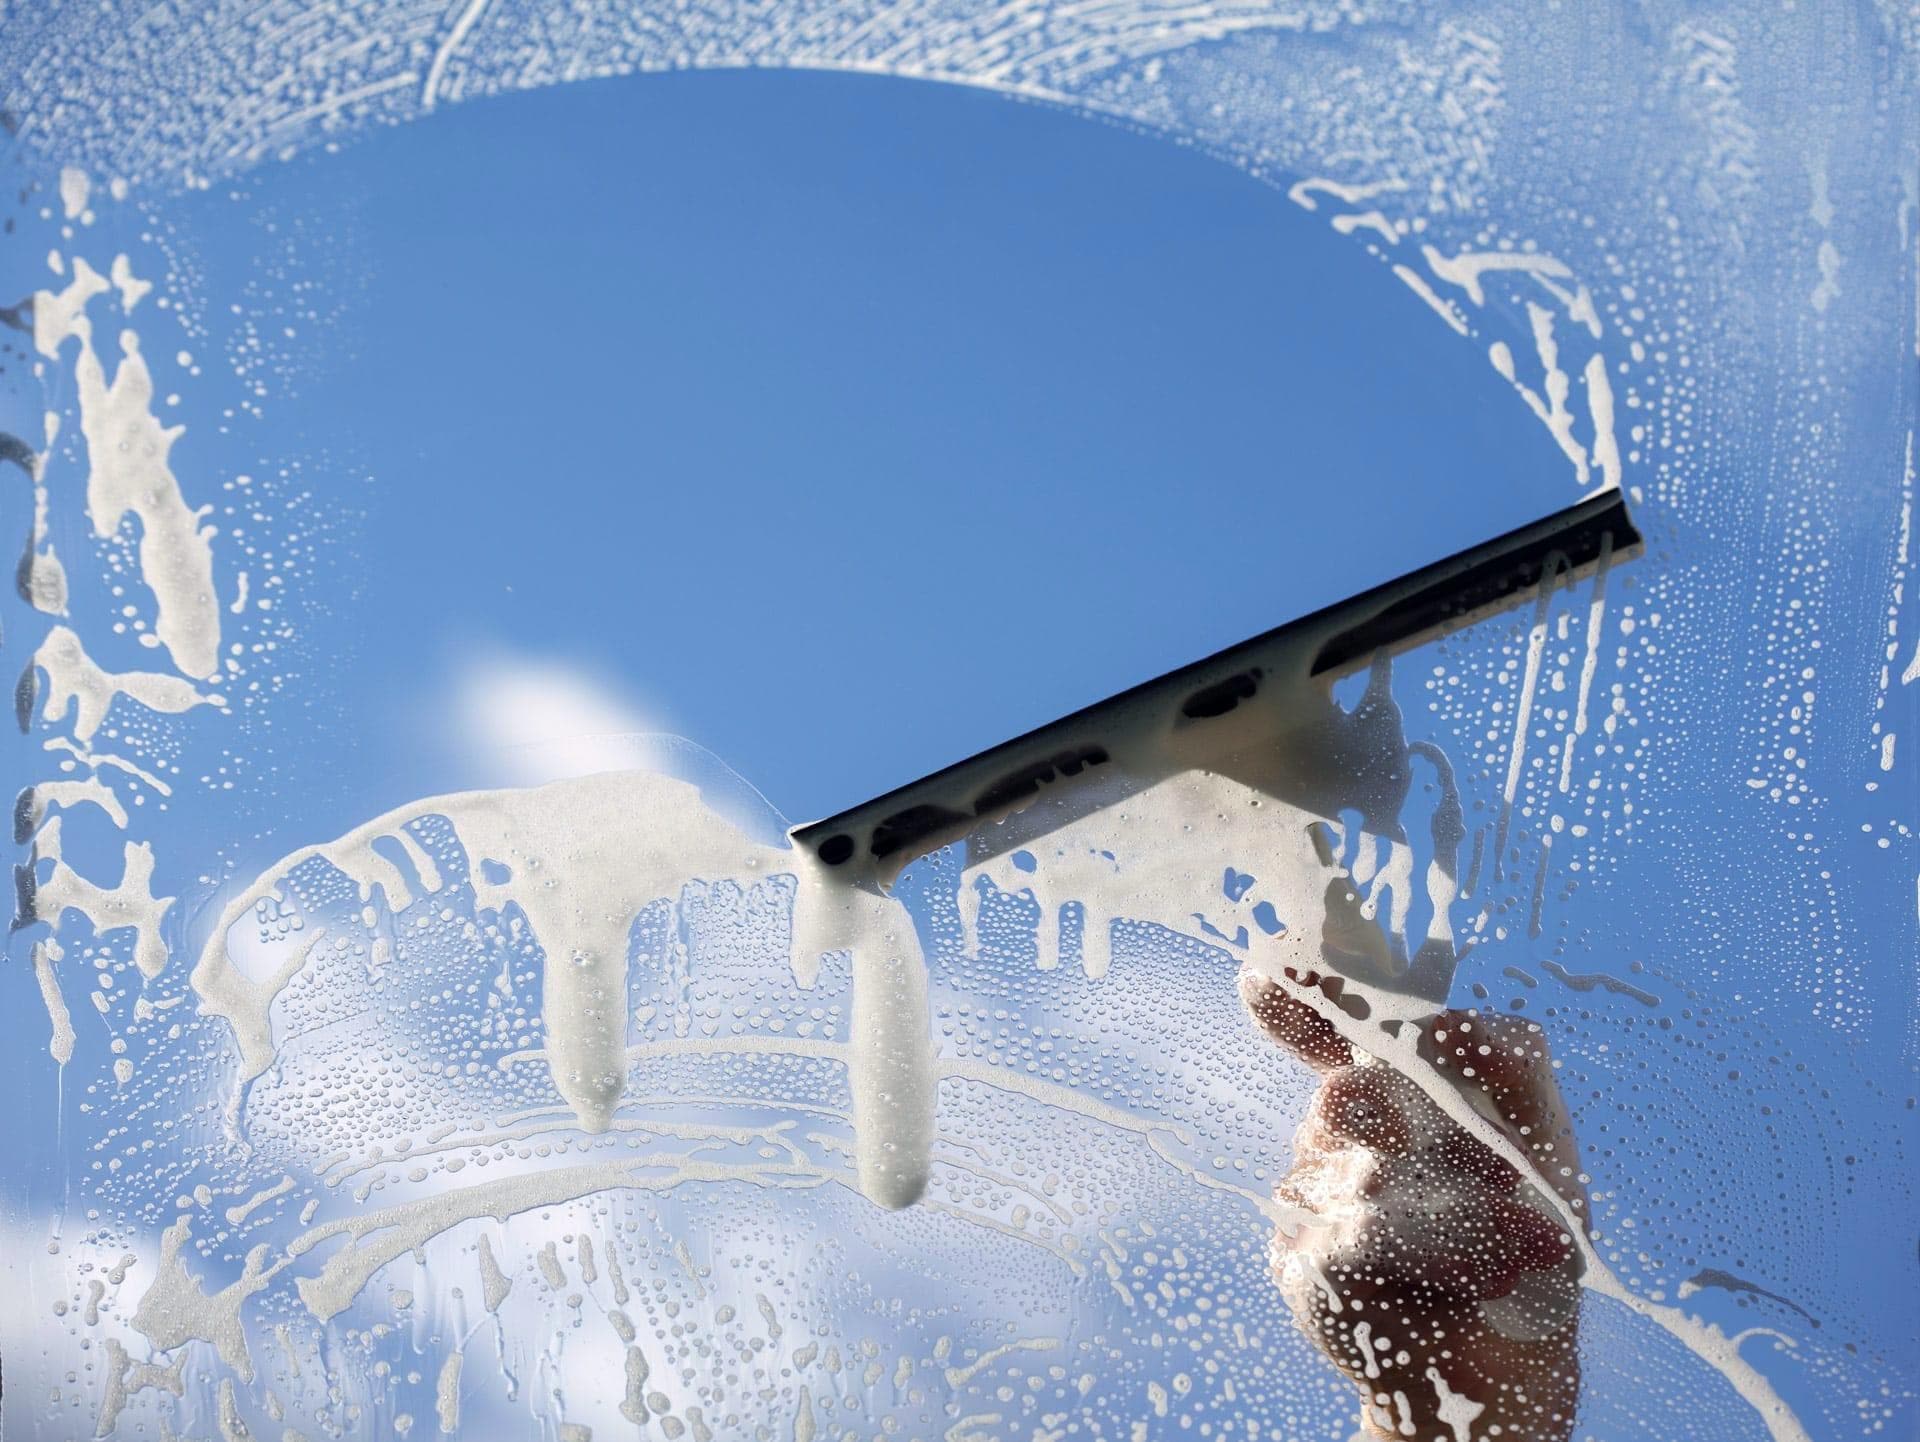 Window Cleaning - An Important Part of General Cleanup